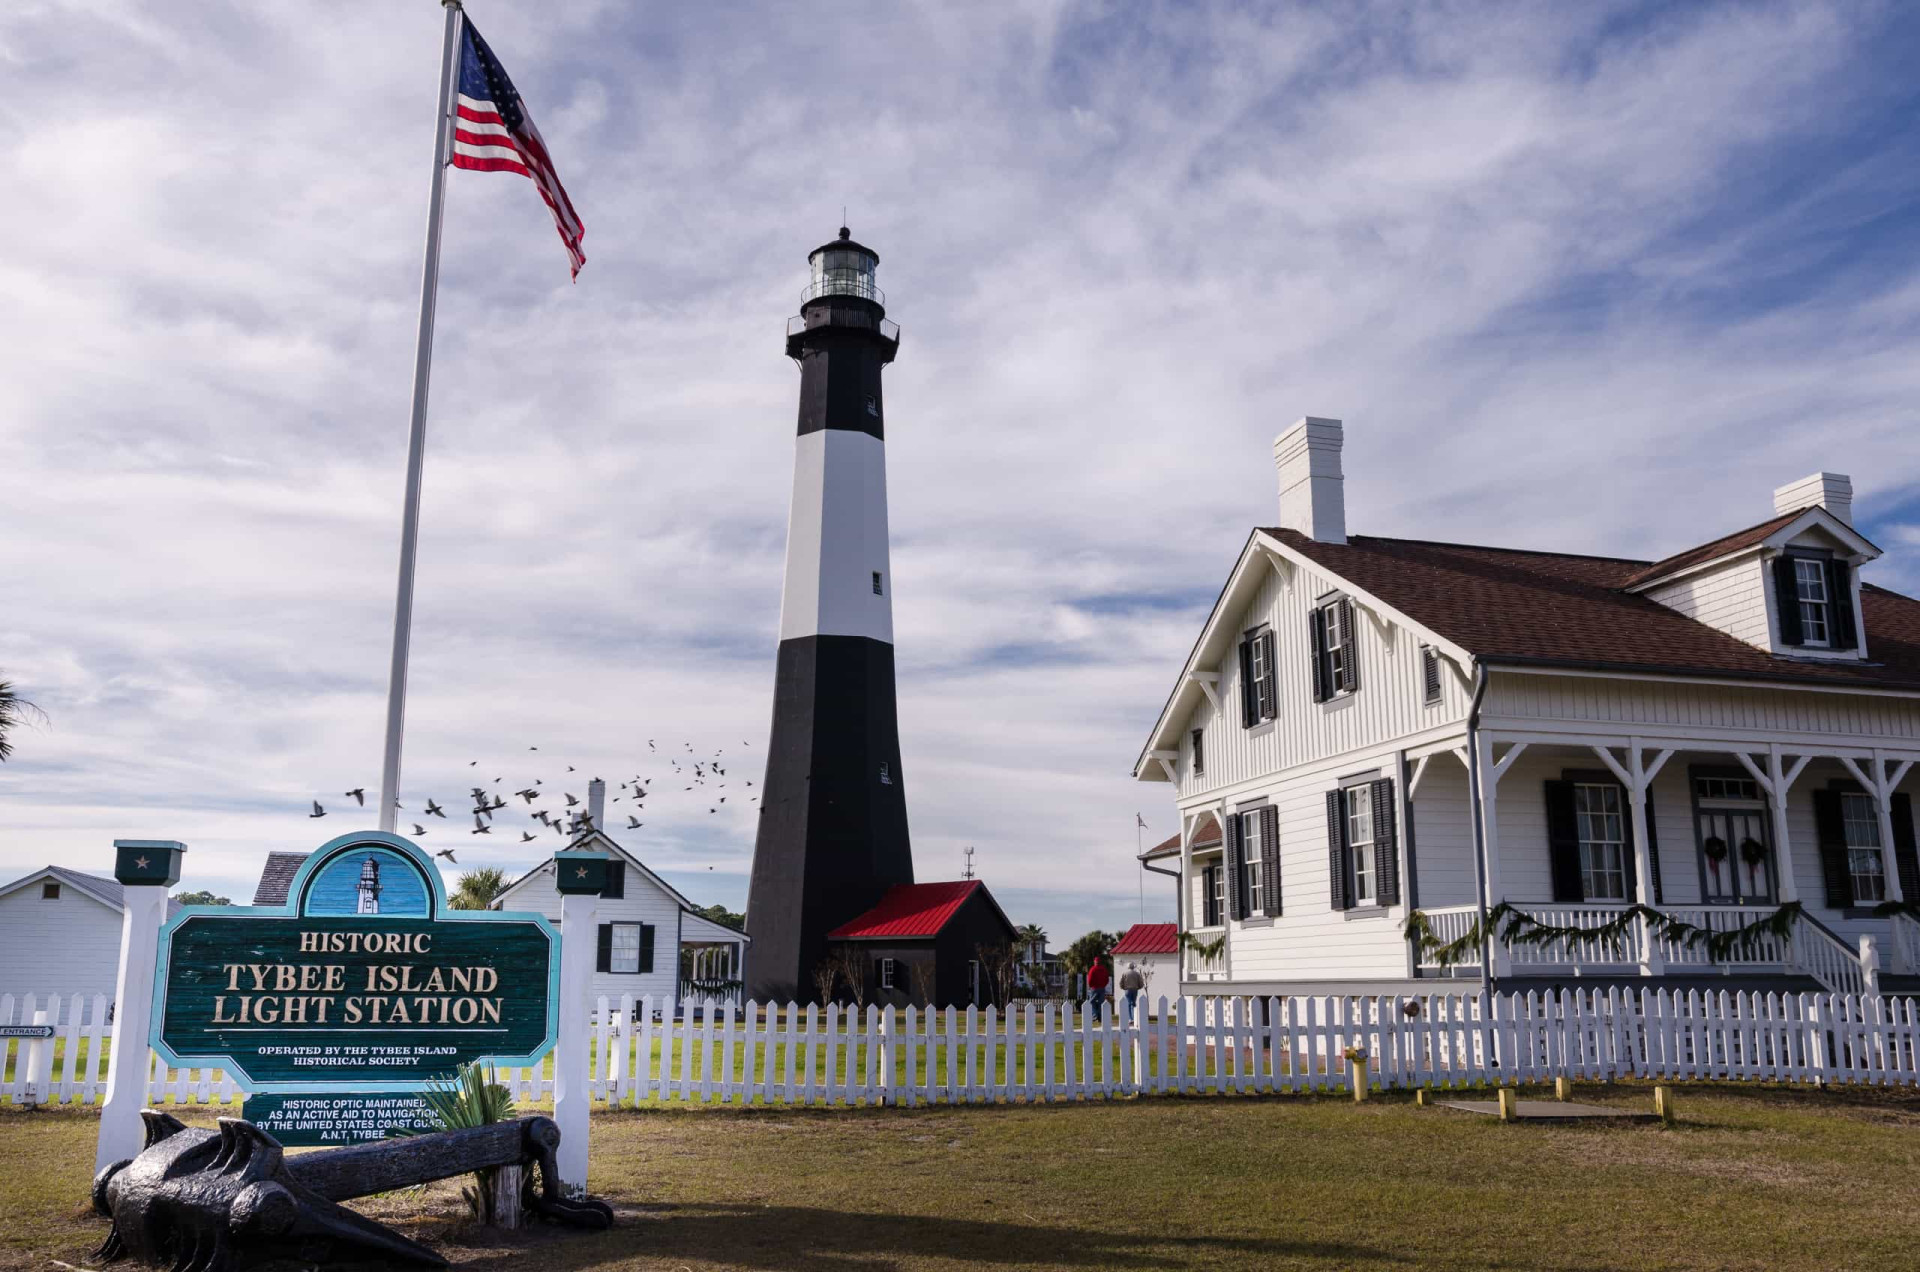 <p>Looking for sea breezes, delicious seafood, and outdoor adventures? You'll find them at Tybee Island. Just a 20-minute drive from Savannah, the barrier island is home to glorious public beaches, as well as the landmark Tybee Lighthouse, which was built in 1736.</p><p>You may also like:<a href="https://www.starsinsider.com/n/295503?utm_source=msn.com&utm_medium=display&utm_campaign=referral_description&utm_content=487017v3en-us"> Celebrities who converted to new religions</a></p>